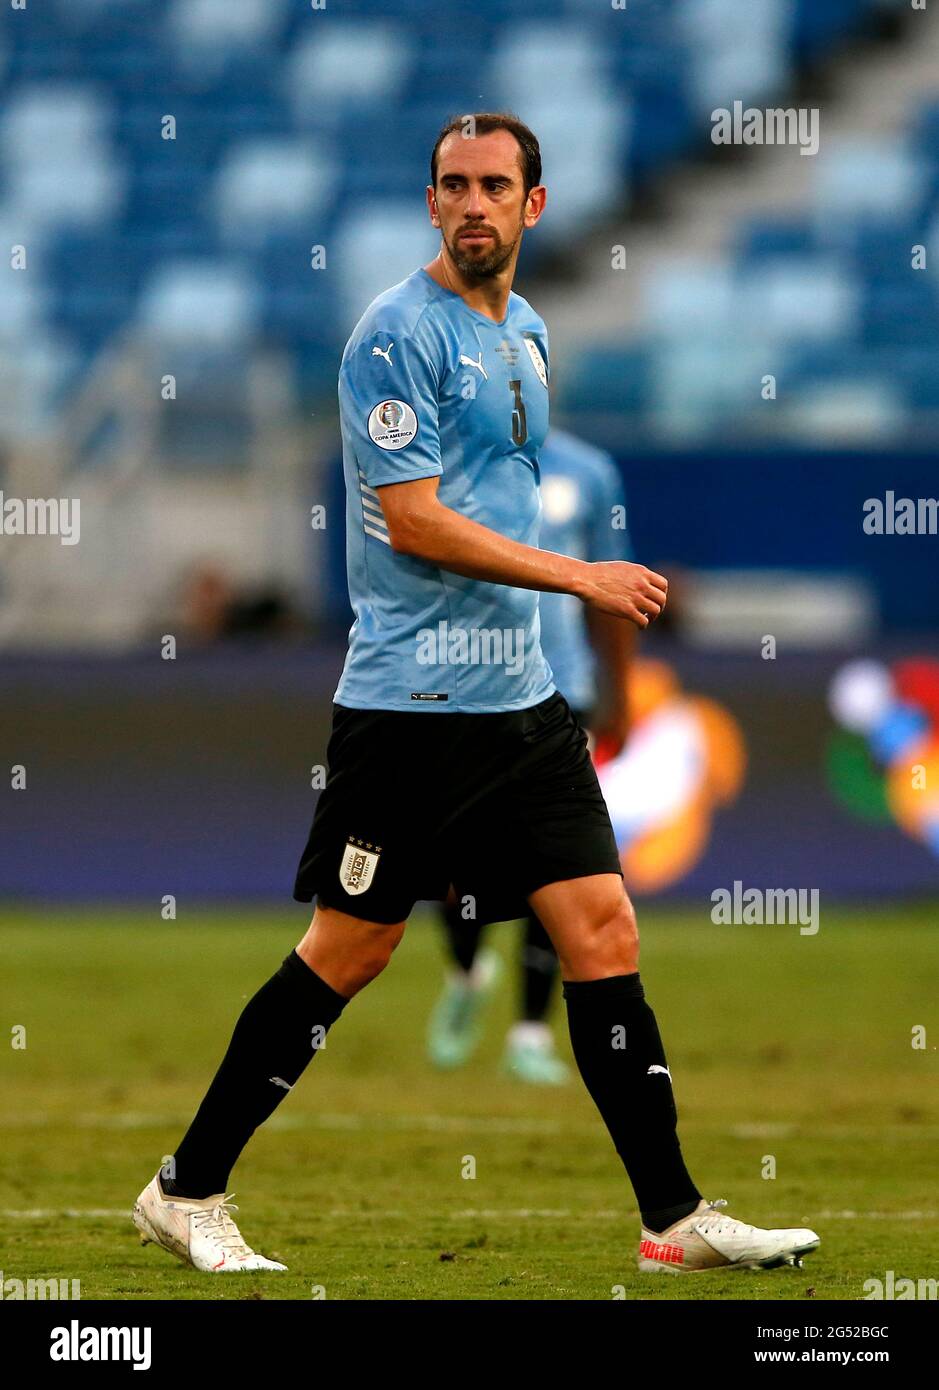 CUIABA, BRAZIL - JUNE 24: Diego Godin of Uruguay in action ,during the match between Bolivia and Uruguay as part of Conmebol Copa America Brazil 2021 at Arena Pantanal on June 24, 2021 in Cuiaba, Brazil. (MB Media) Stock Photo